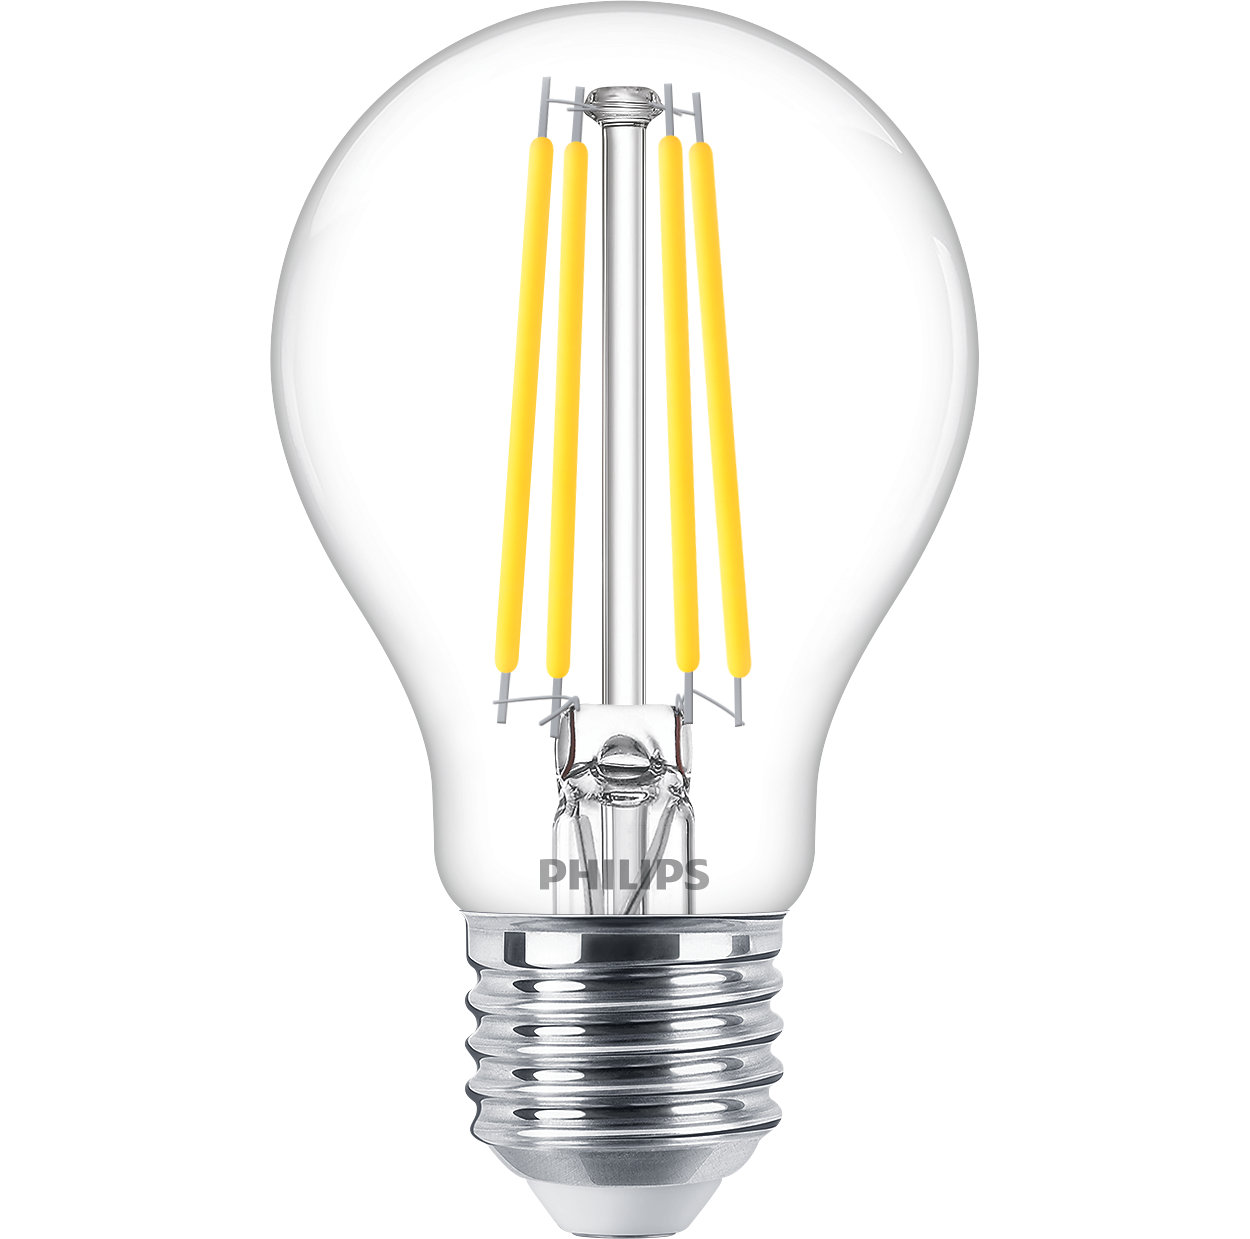 Dimmable glass LED bulbs with less energy consumption